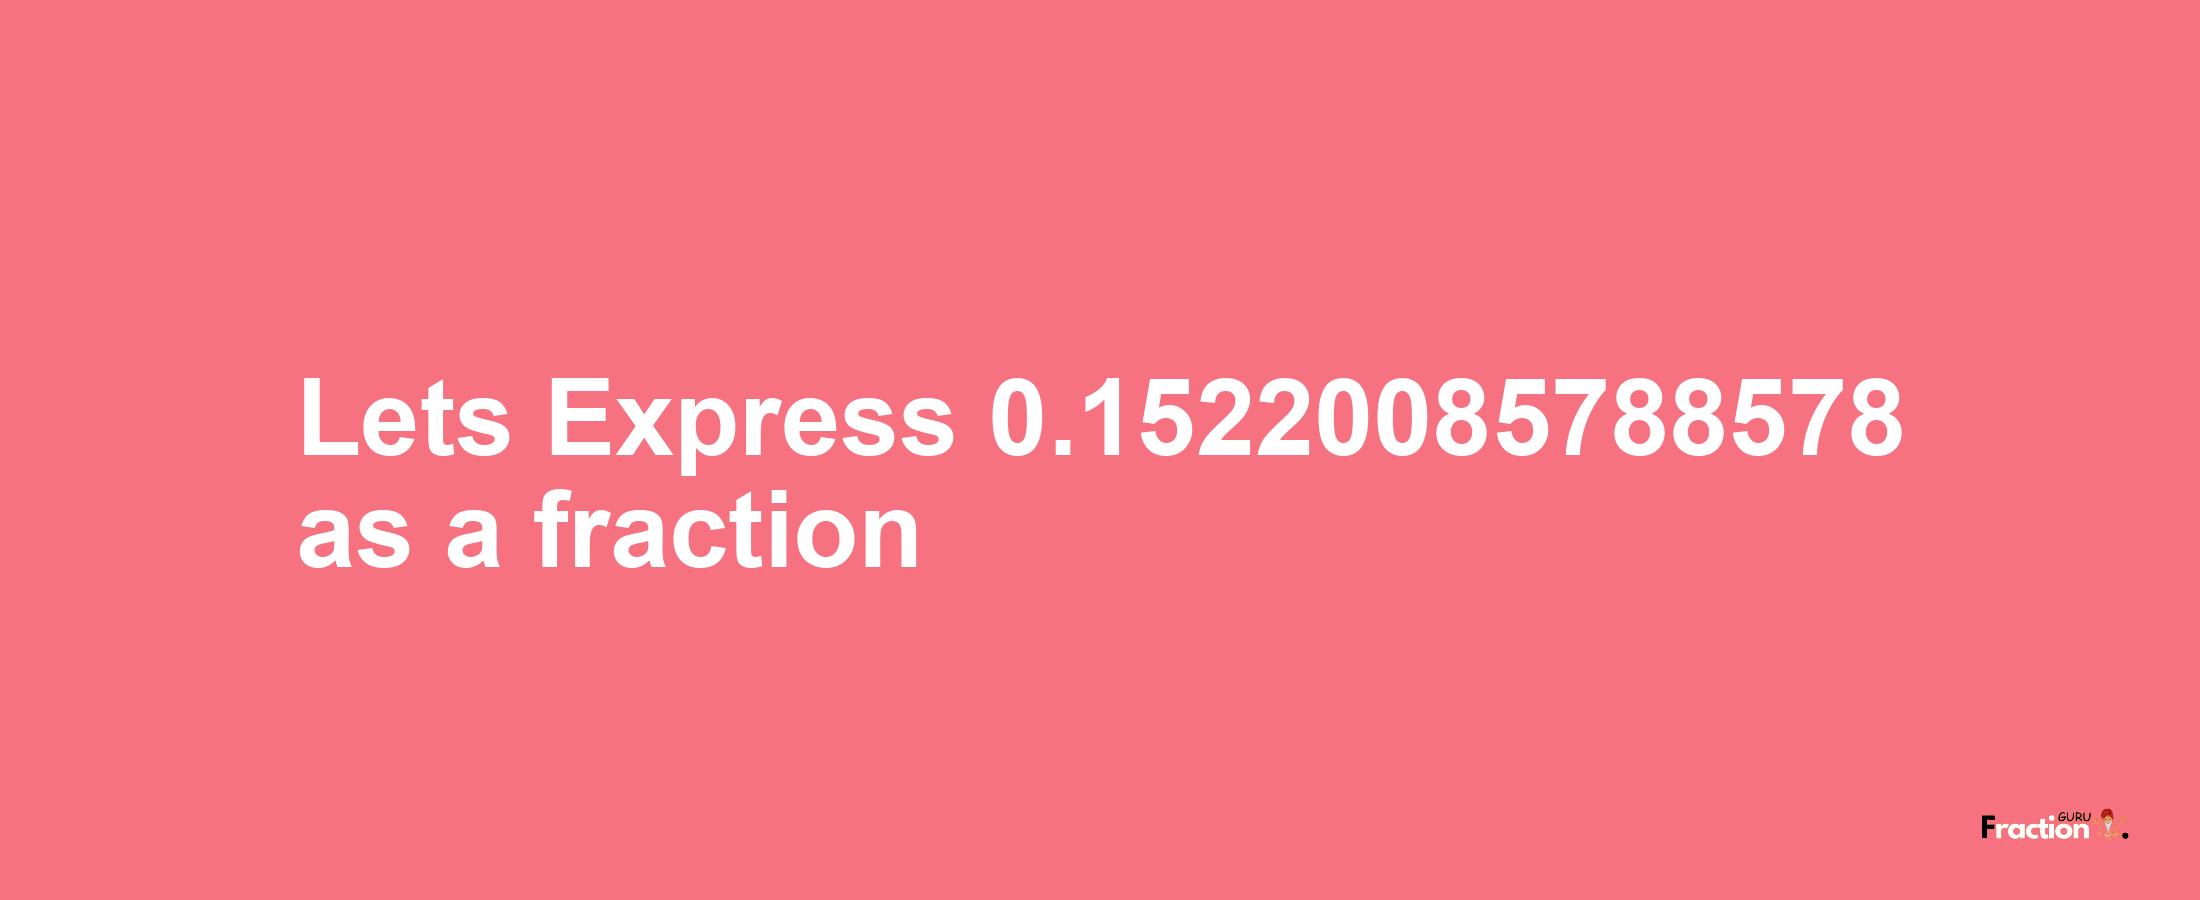 Lets Express 0.15220085788578 as afraction